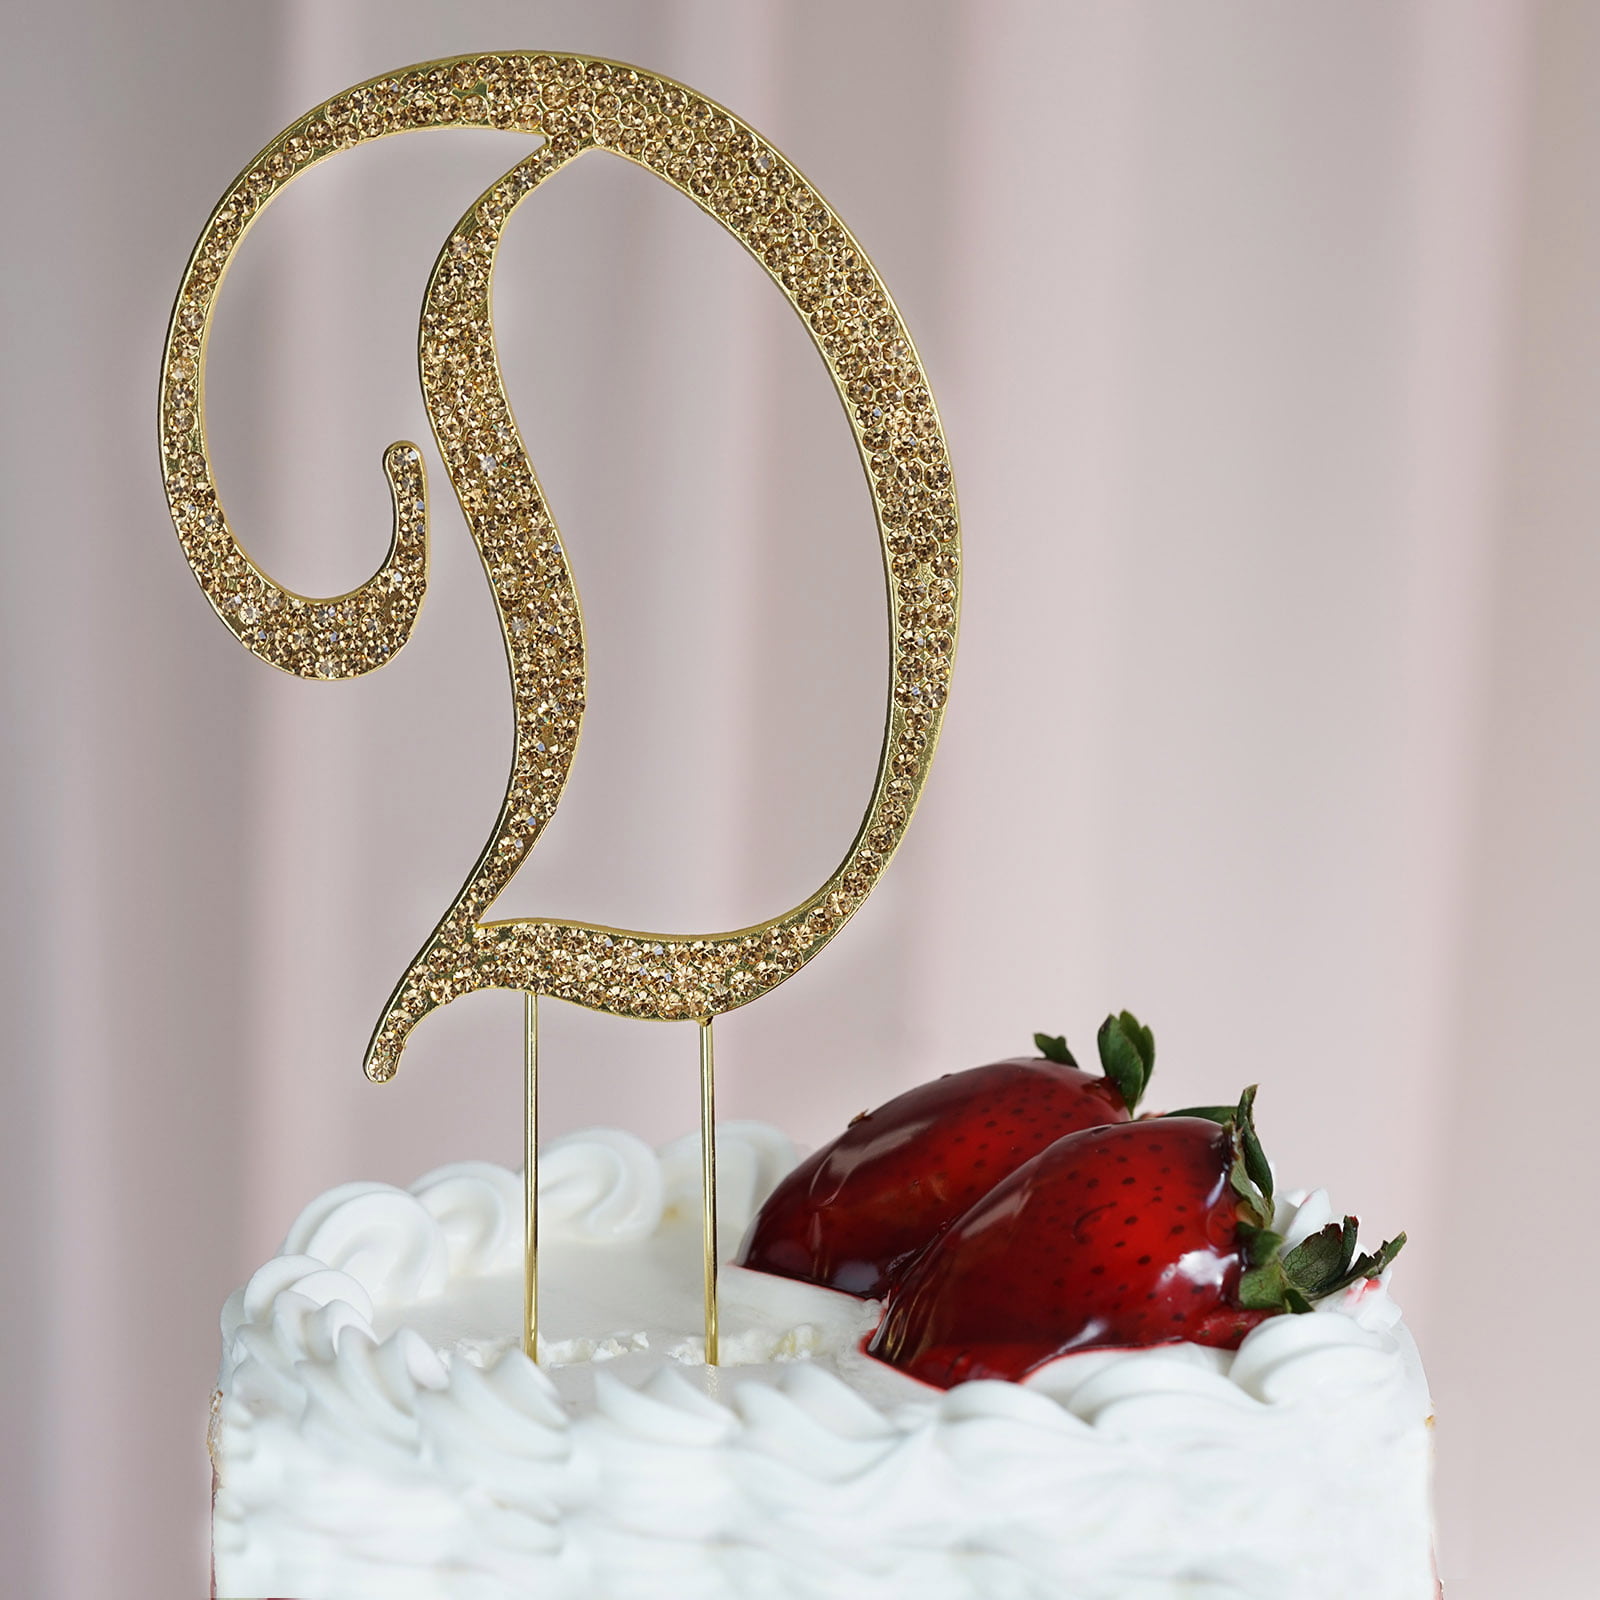 Gold Rhinestone Monogram Letter and Number Cake Toppers 4.5 in 2023